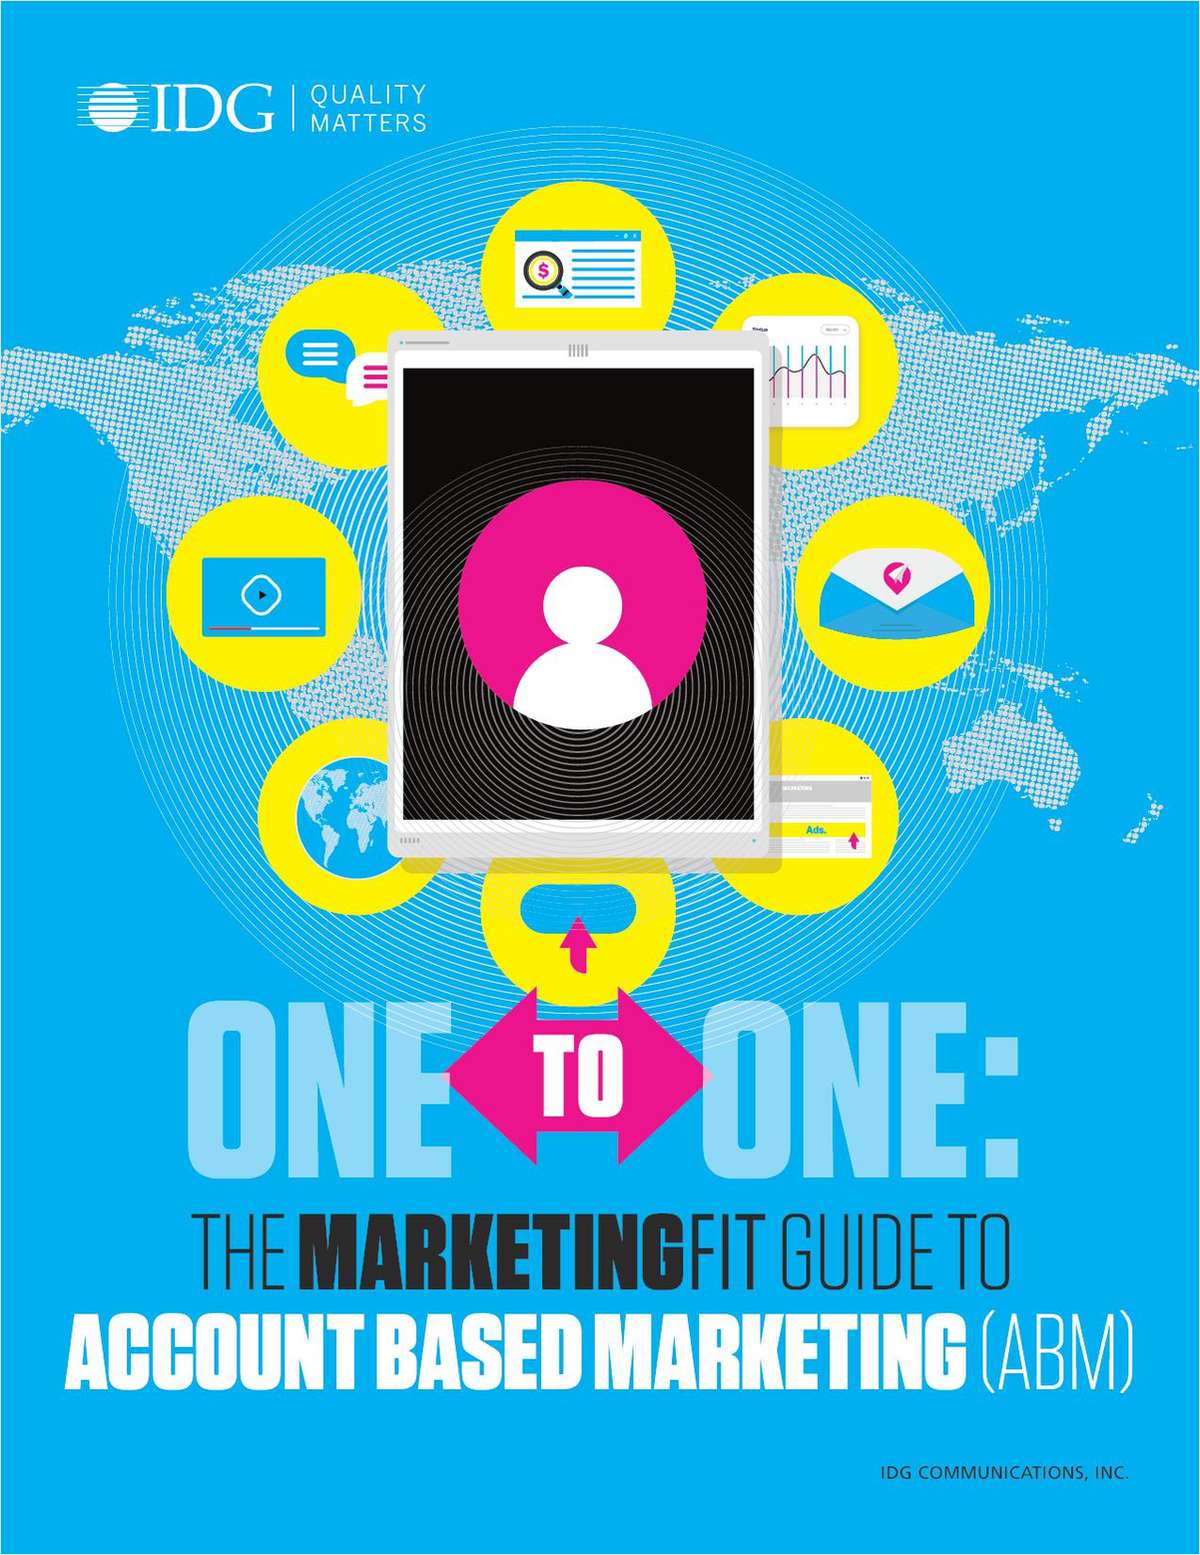 One to One: The IDG MarketingFit Guide to Account Based Marketing (ABM)